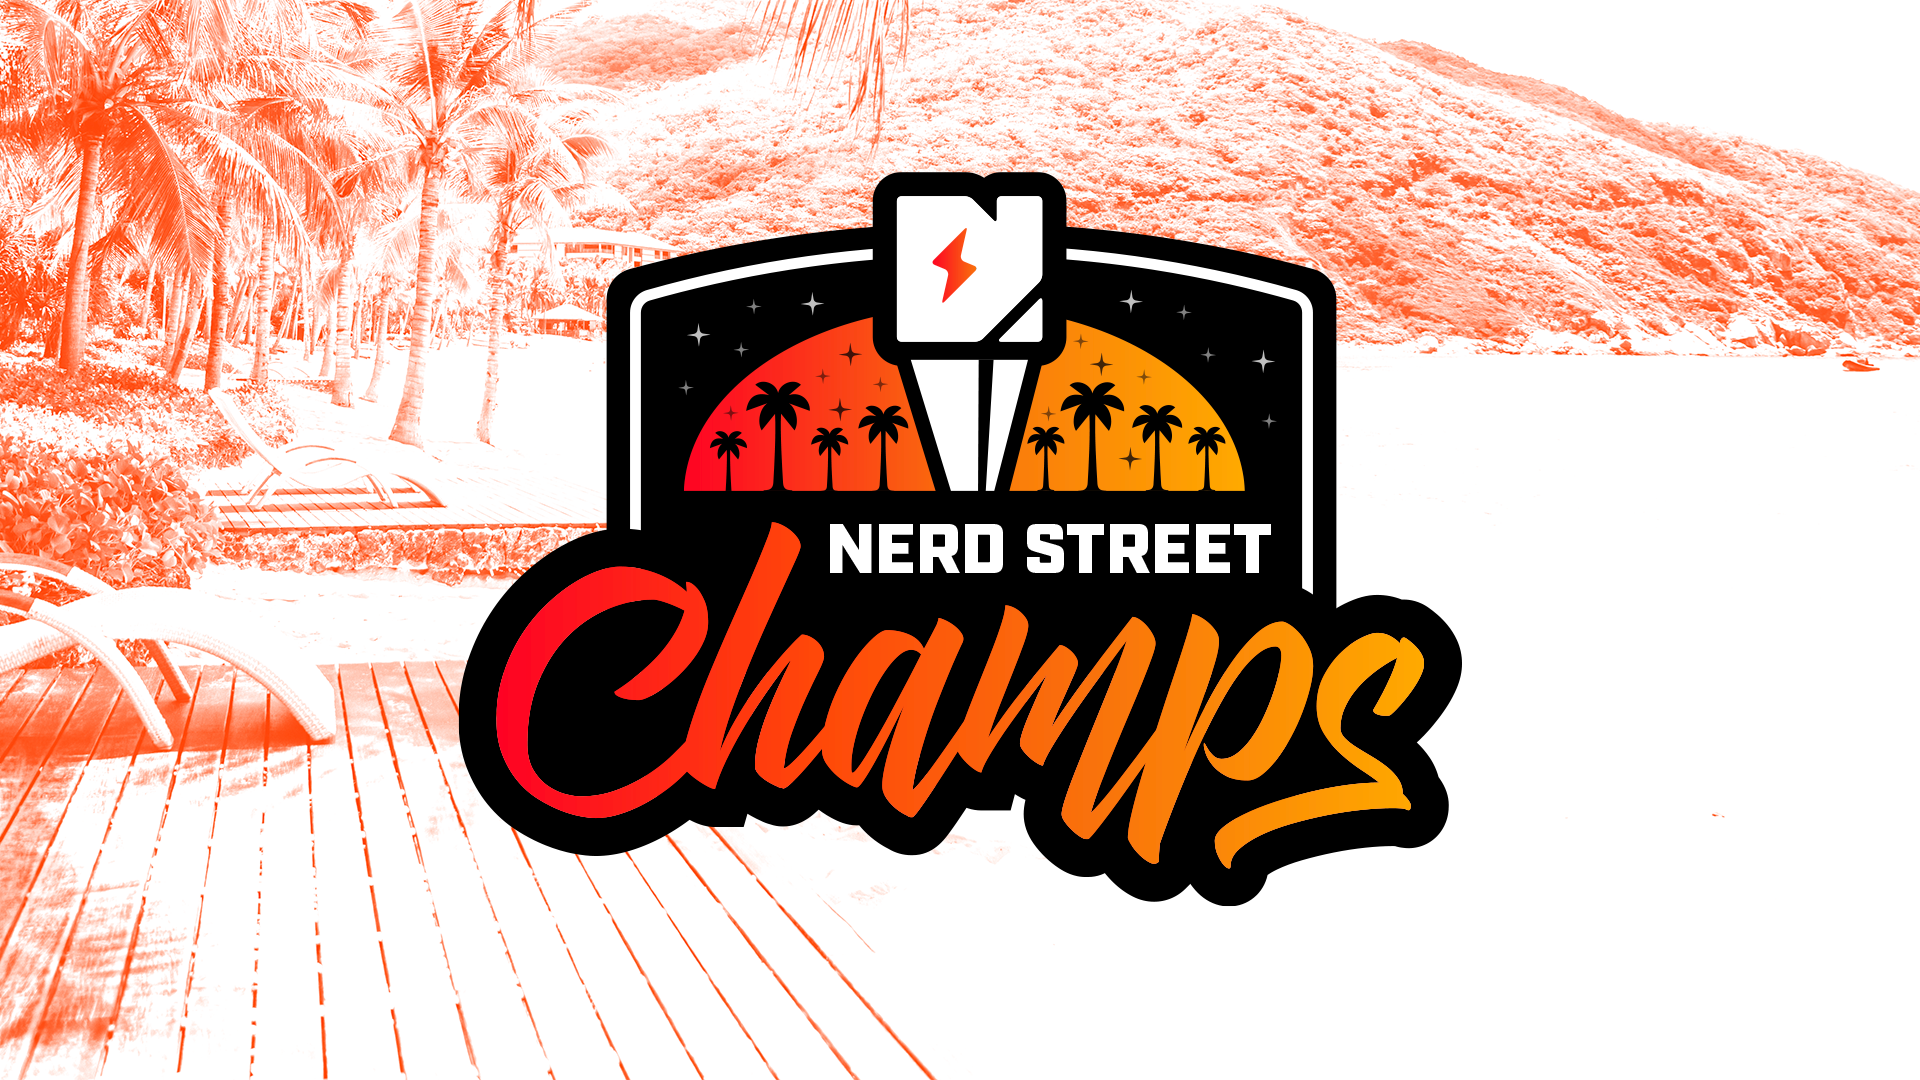 The Nerd Street Champs logo in the middle in orange against a faded orange beach background